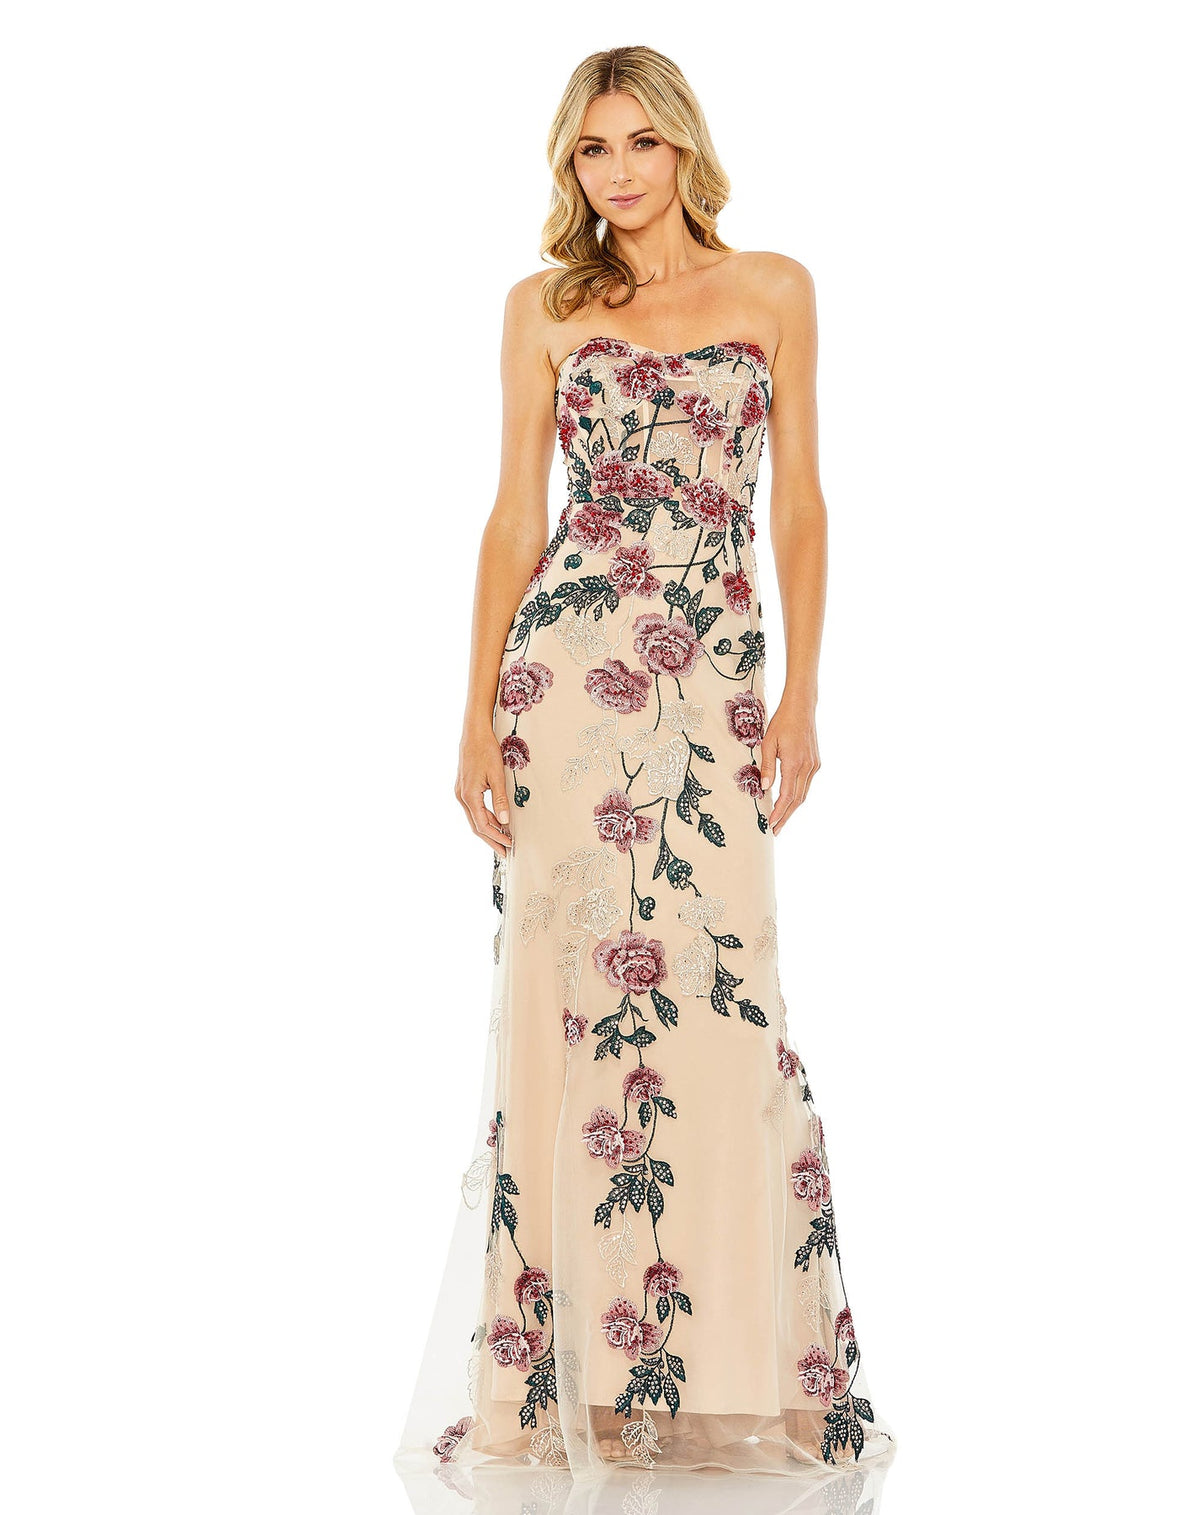 Mac Duggal, Strapless Floral Embroidered Gown - Nude, Style #20581